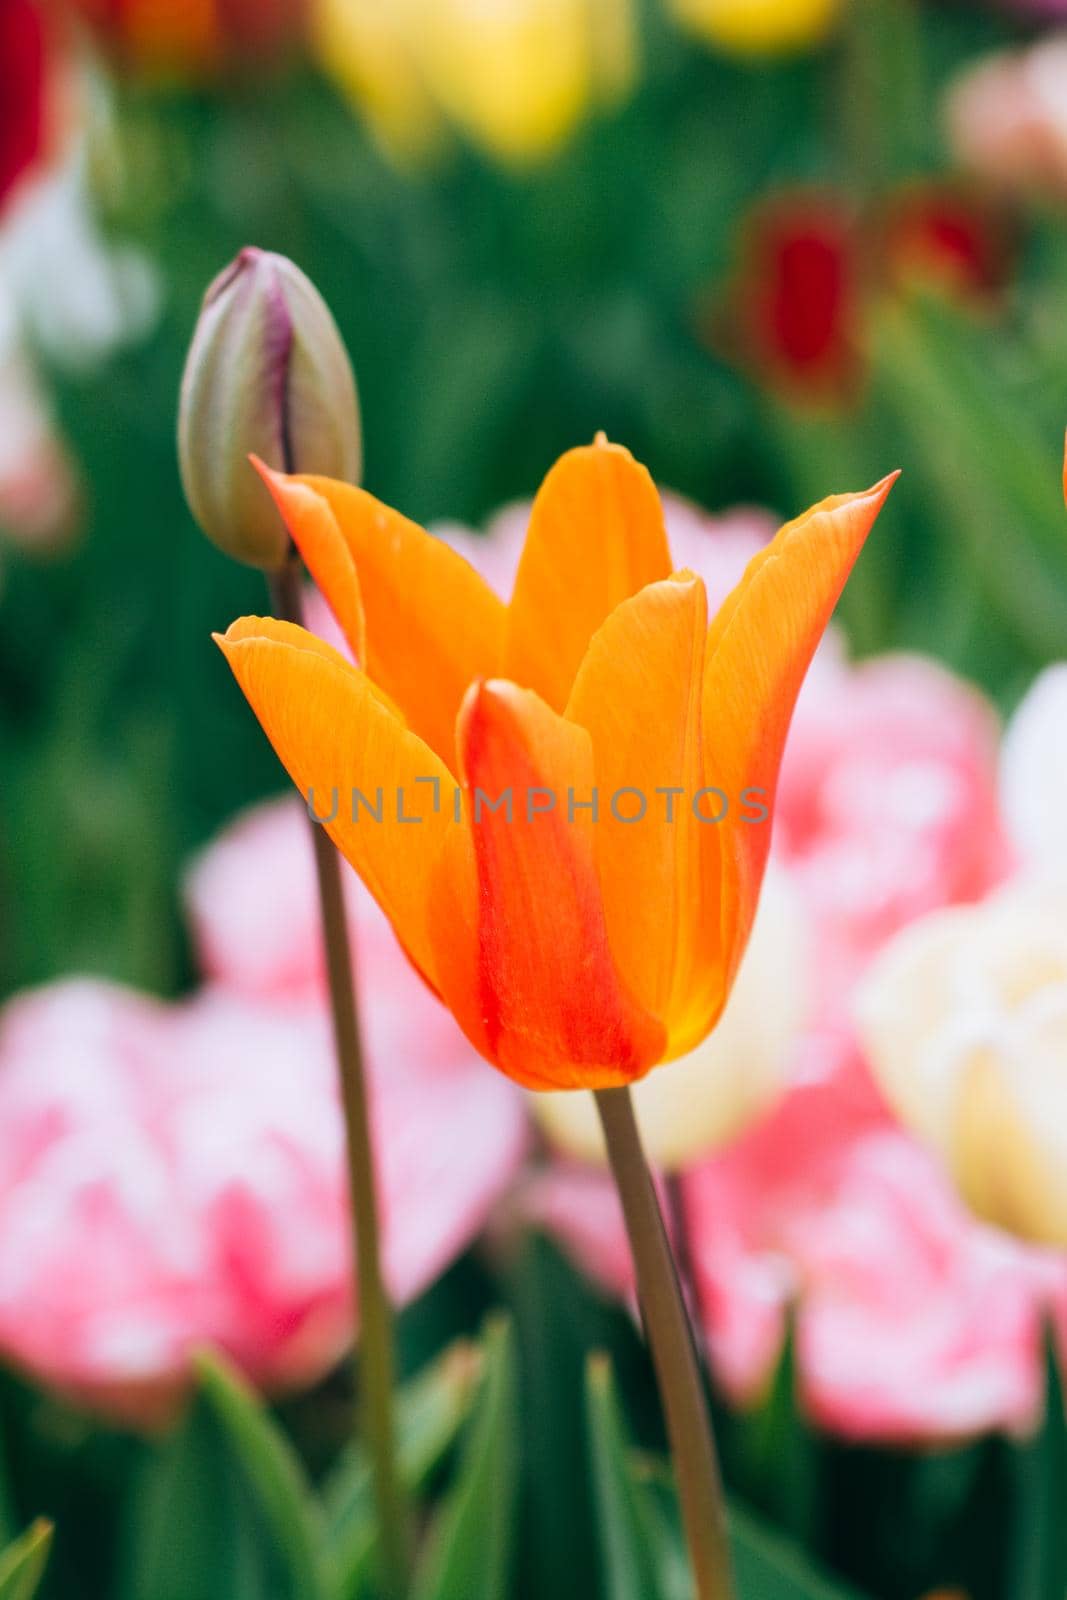 Beautiful tulips flower for postcard beauty concept design